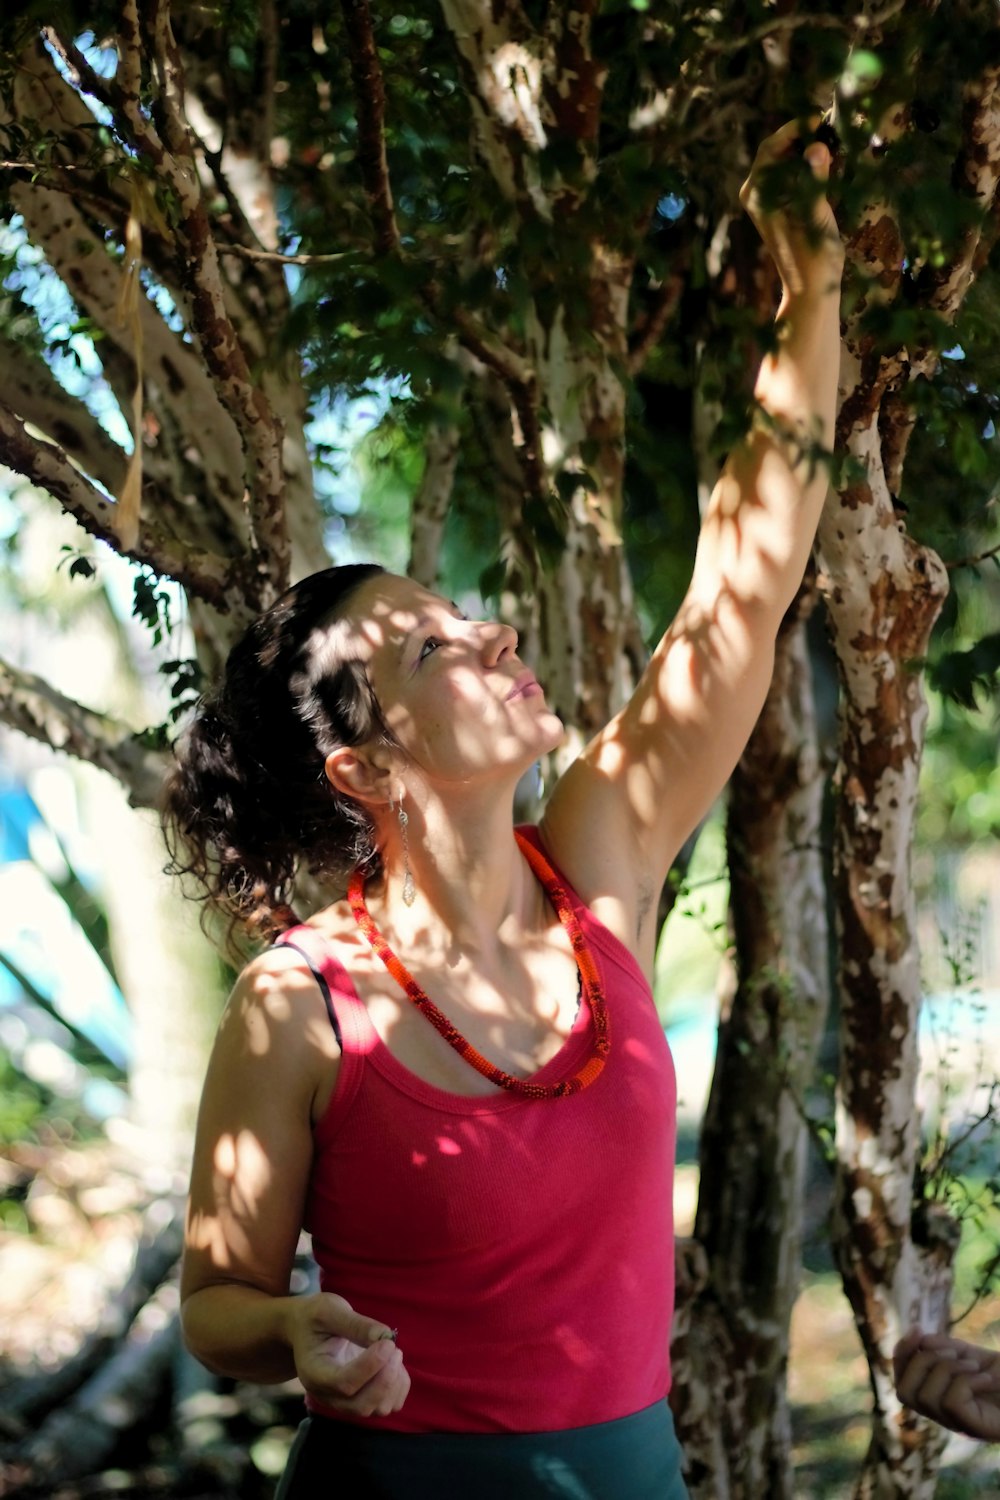 a woman reaching up into a tree to reach a frisbee